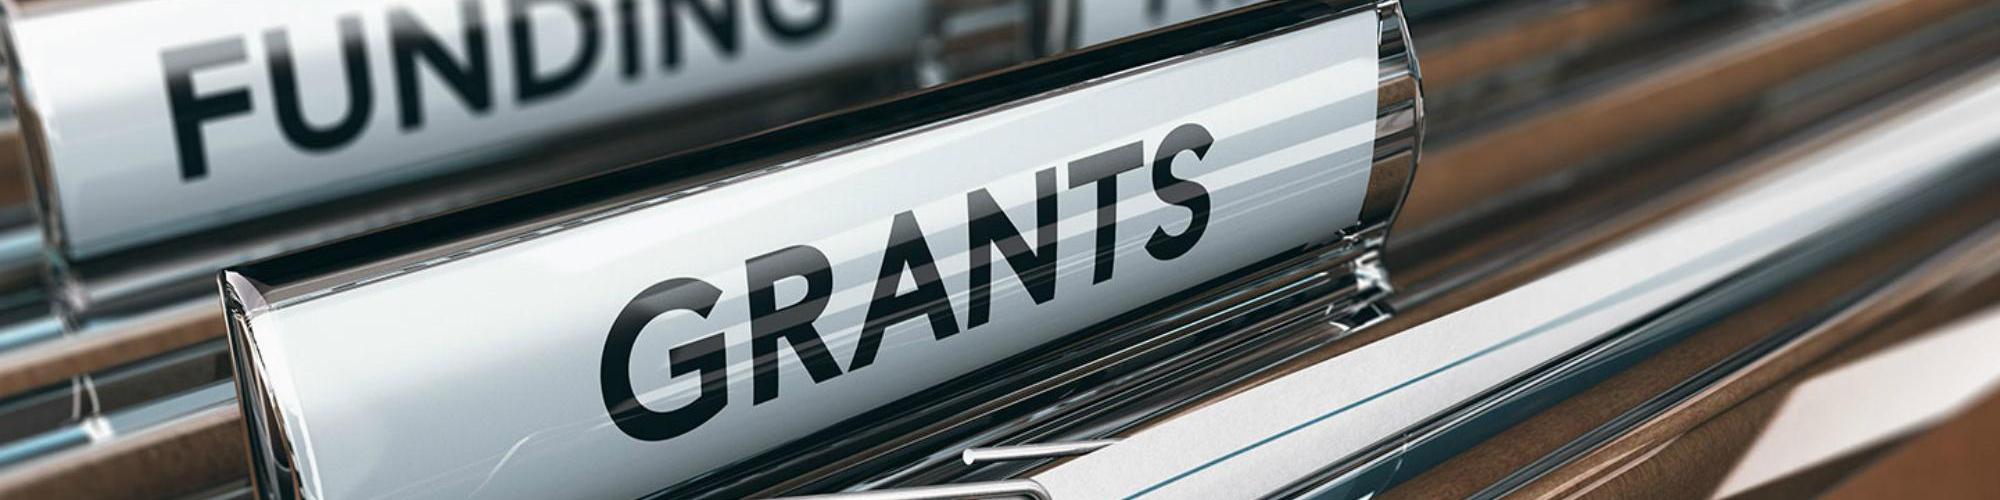 Funding and Grants for each agency